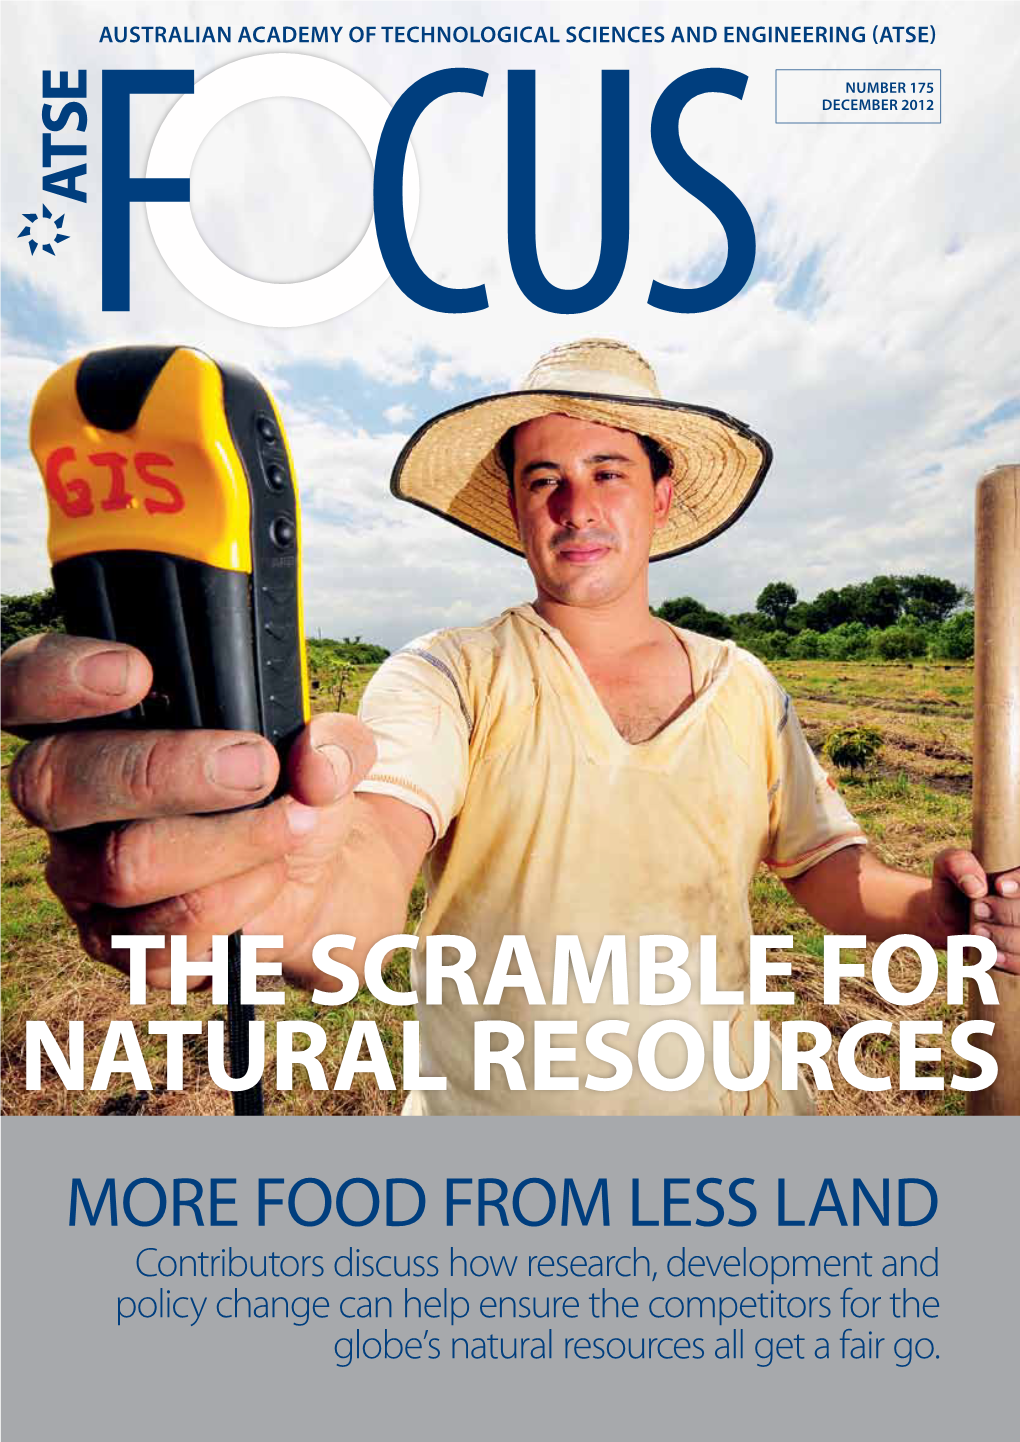 The Scramble for Natural Resources: More Food from Less Land